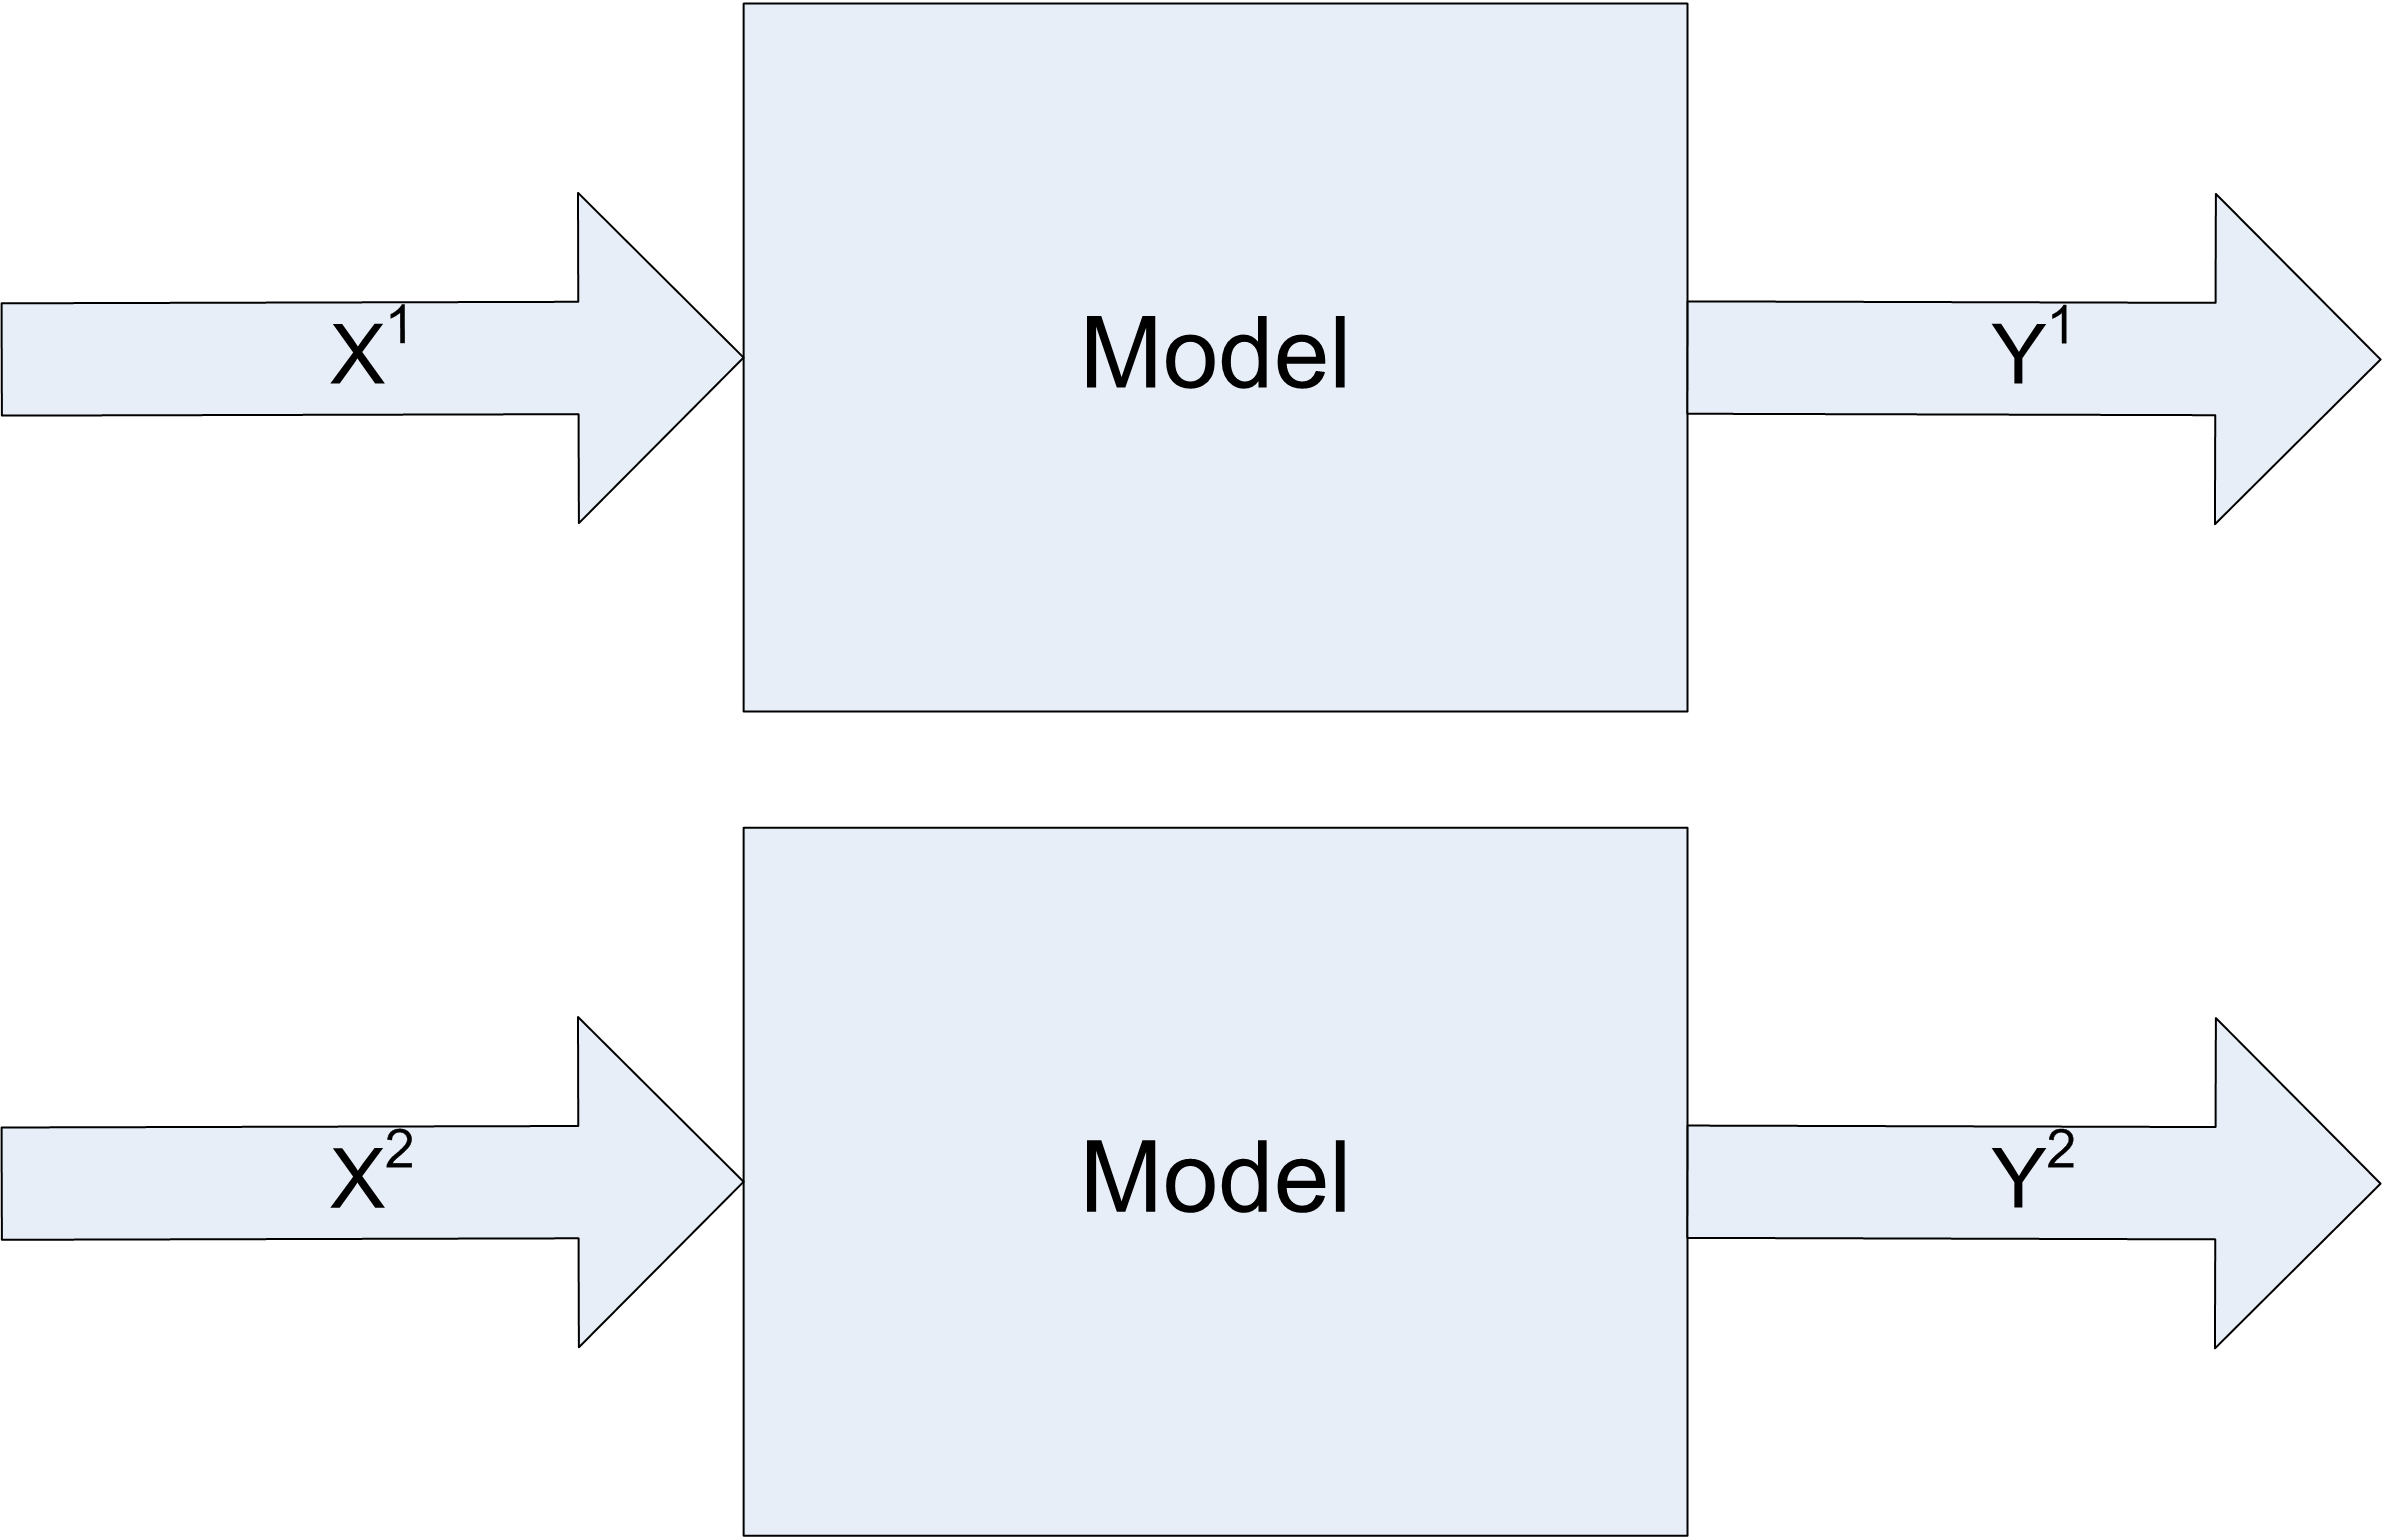 Changing inputs on models represent different system configurations